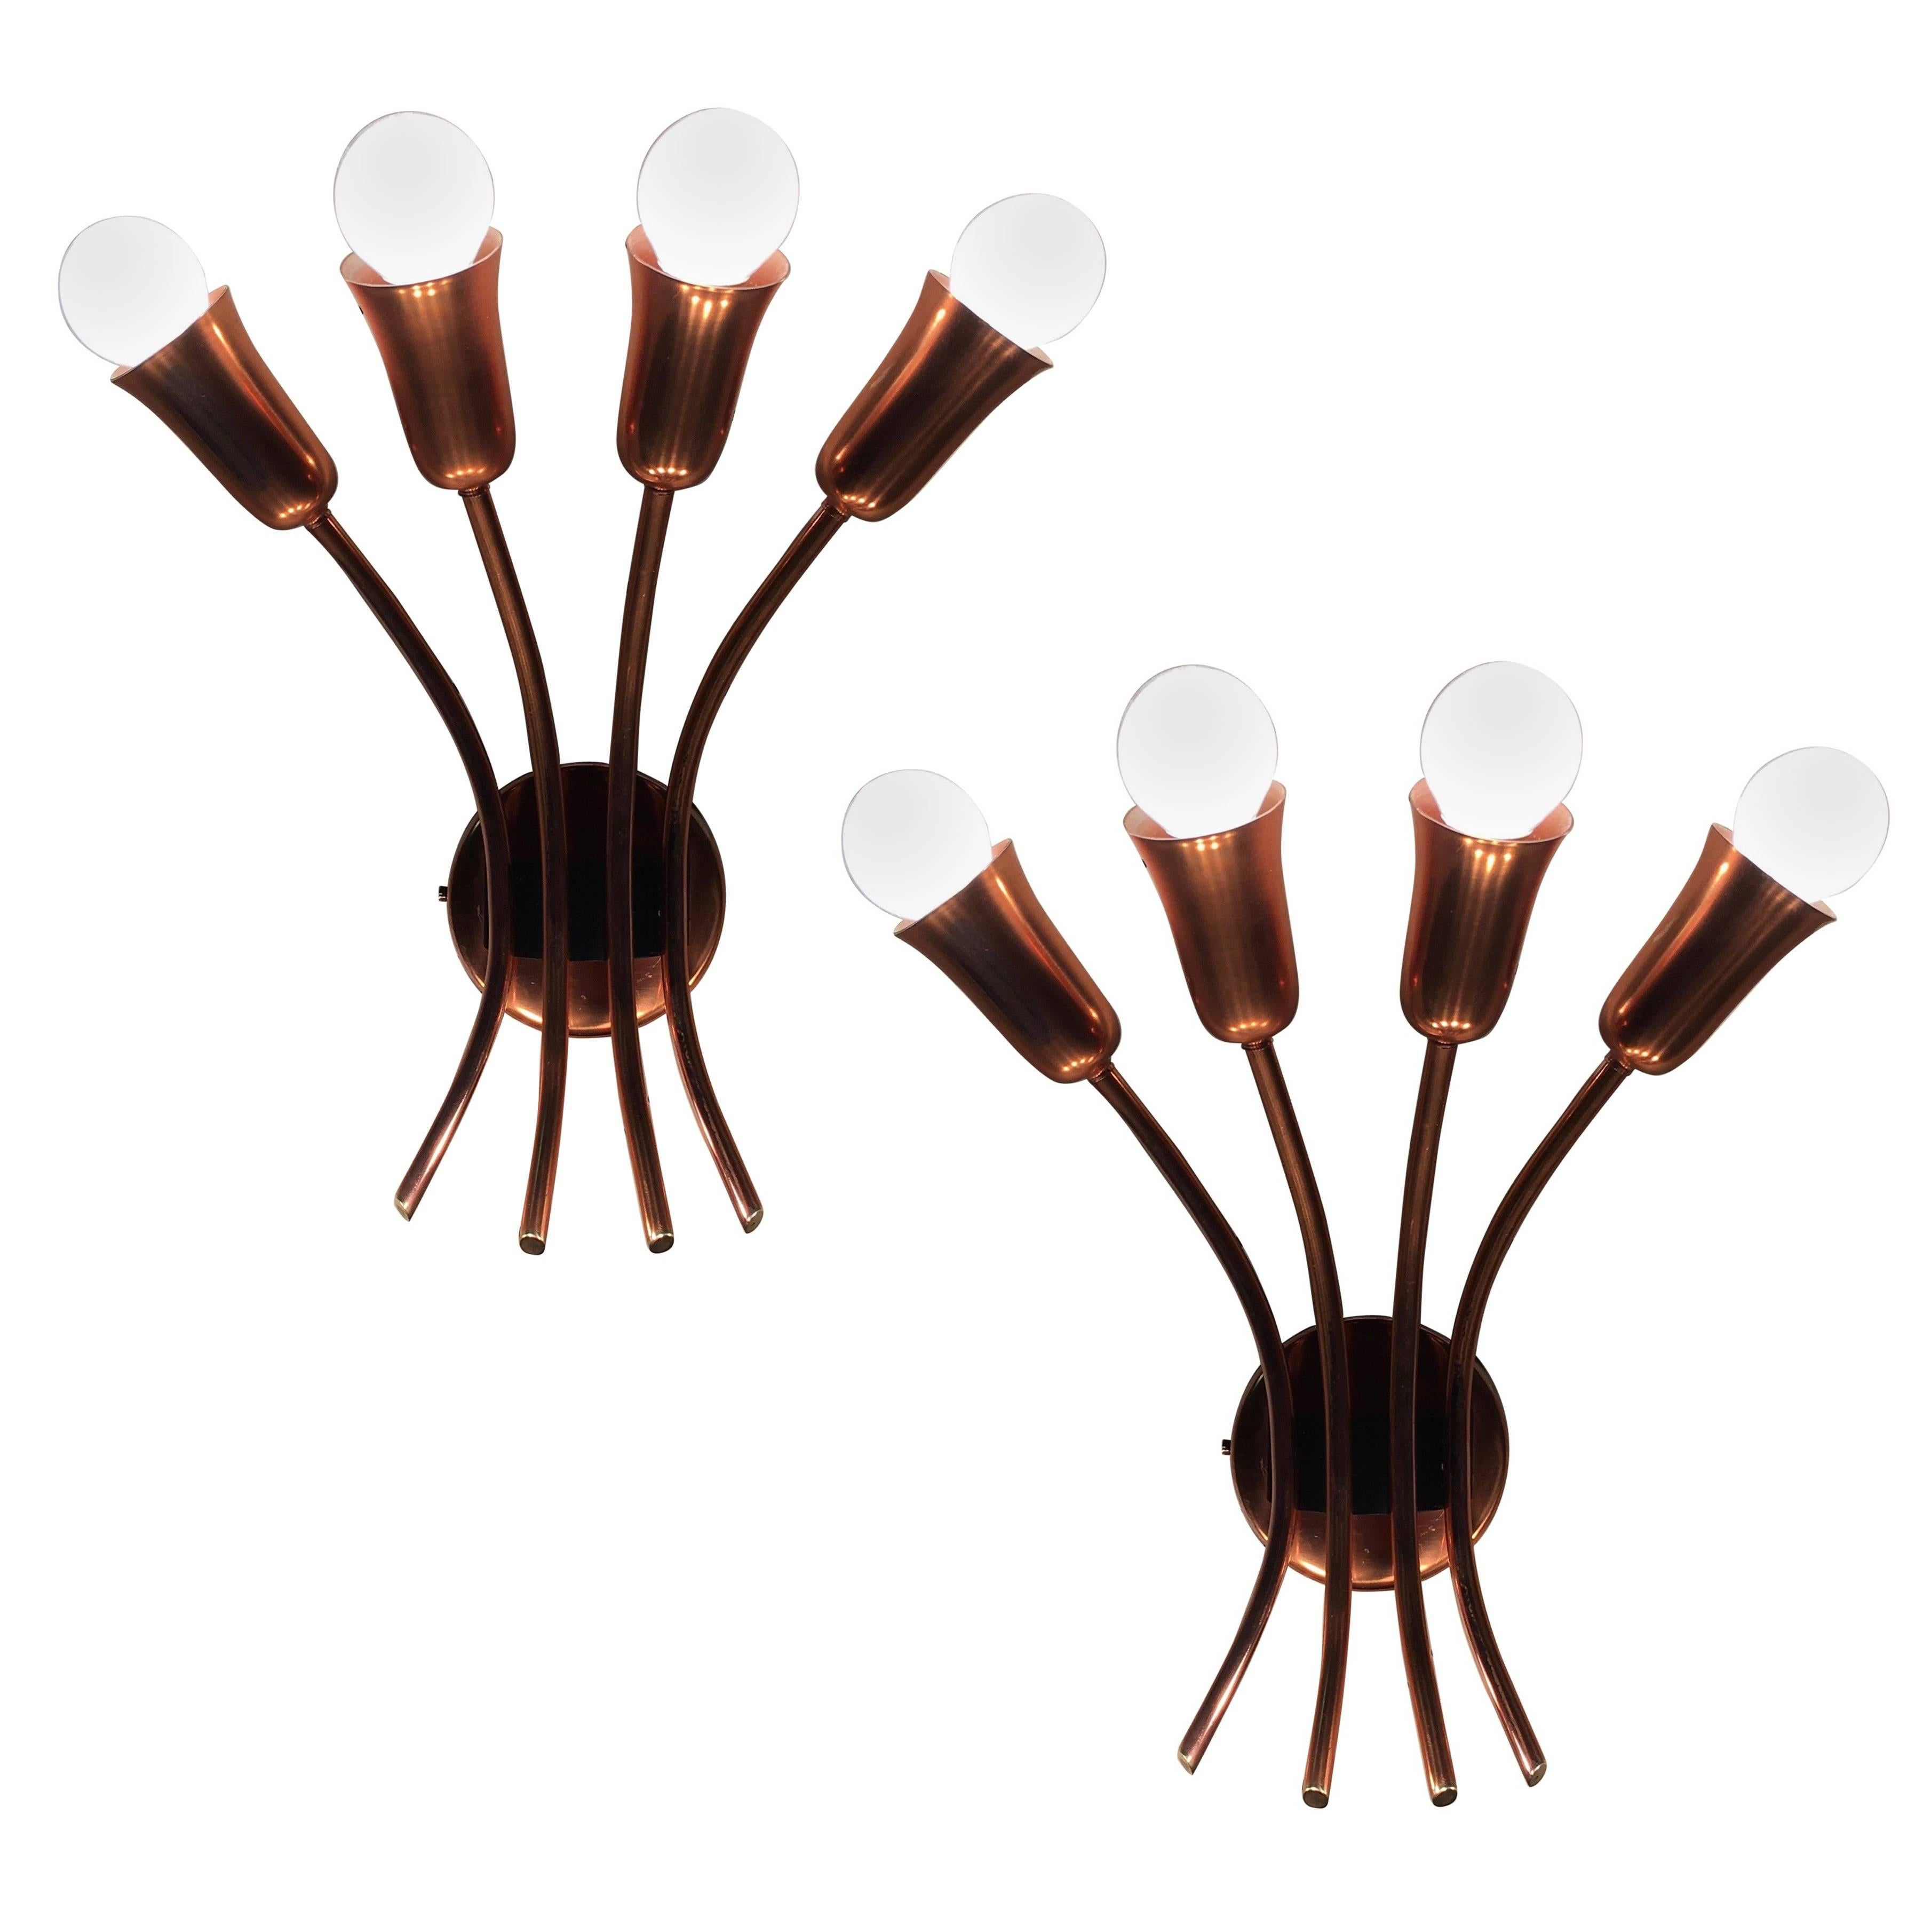 Brown Evans and Co. 'BECO' Copper Wall Sconces for Anatol Kagan, Melbourne 1950s